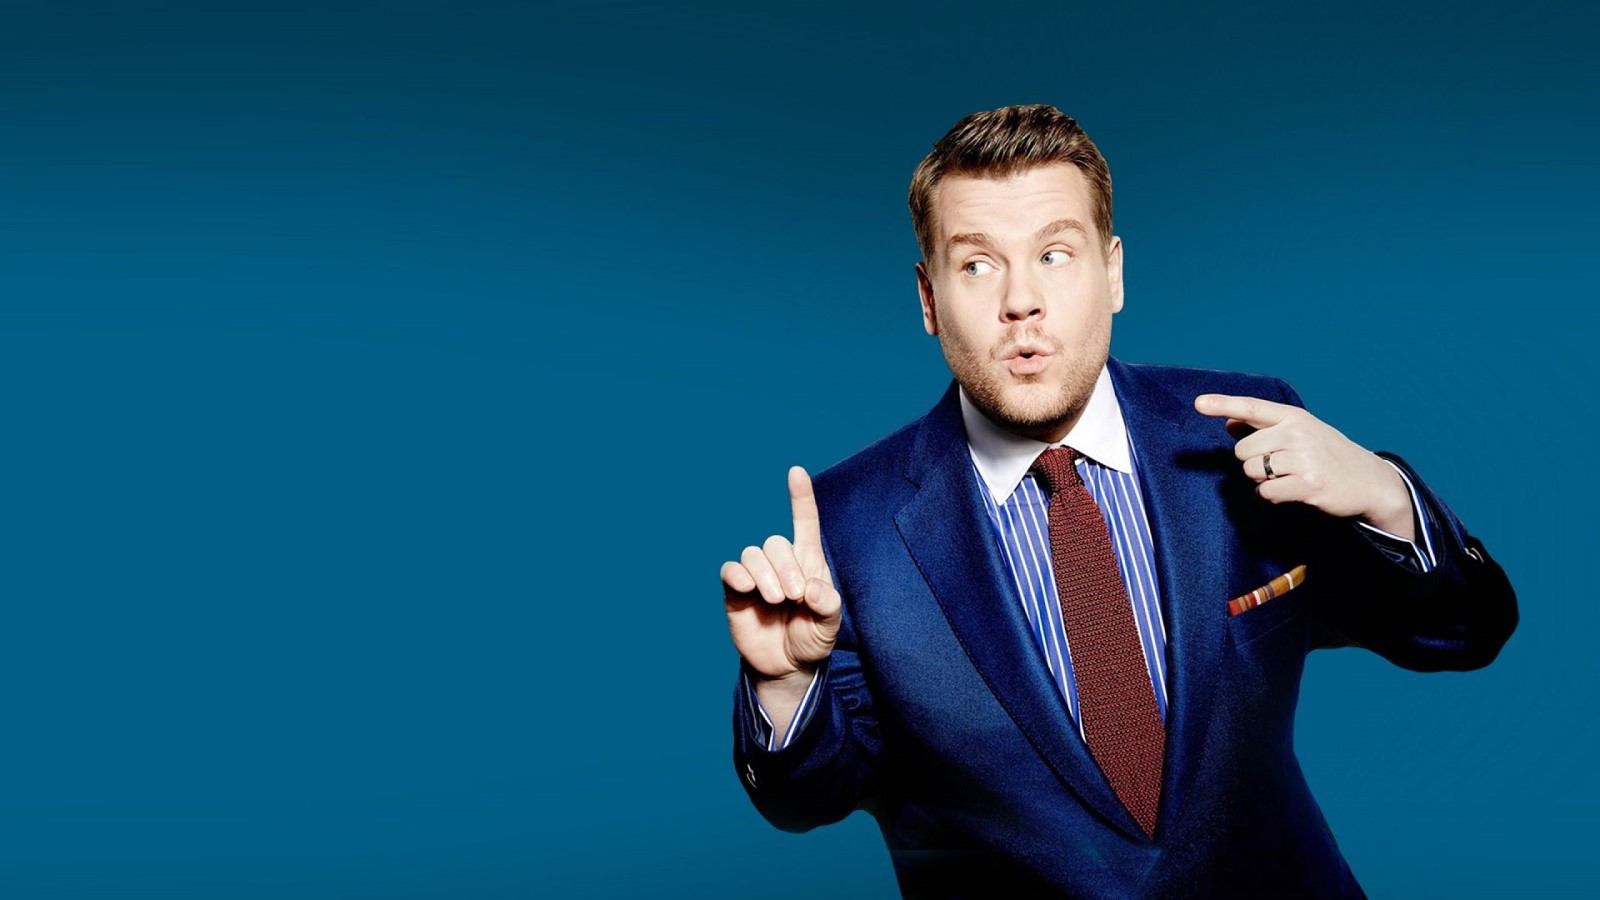 How to Watch 'Homefest James Corden’s Late Late Show Special' Online